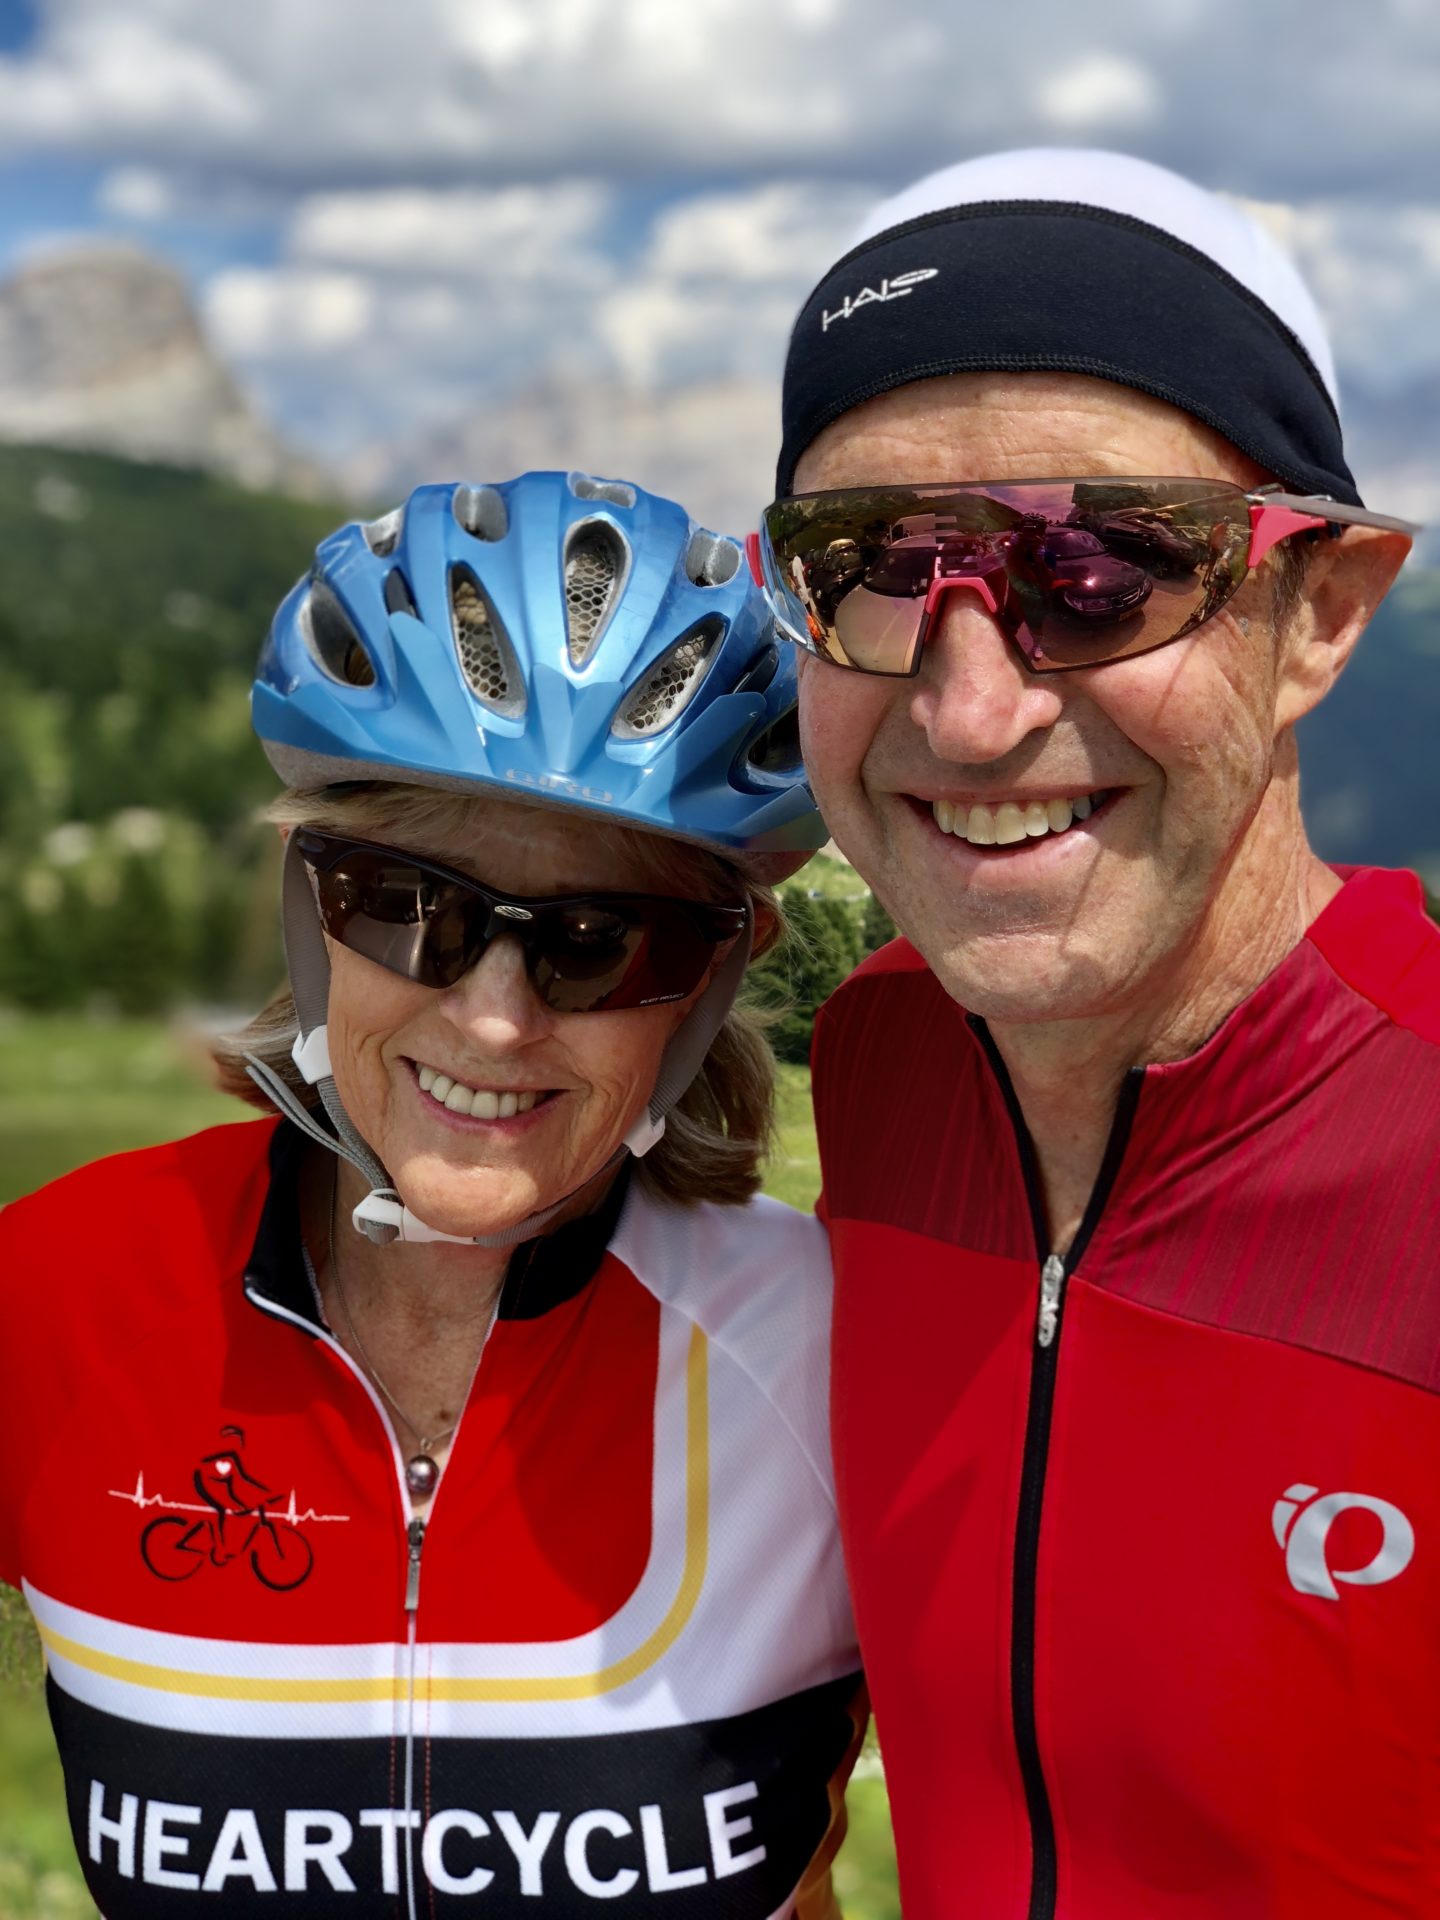 A white man and woman wearing bike jerseys and helmets smile. They are photographed from chest up.